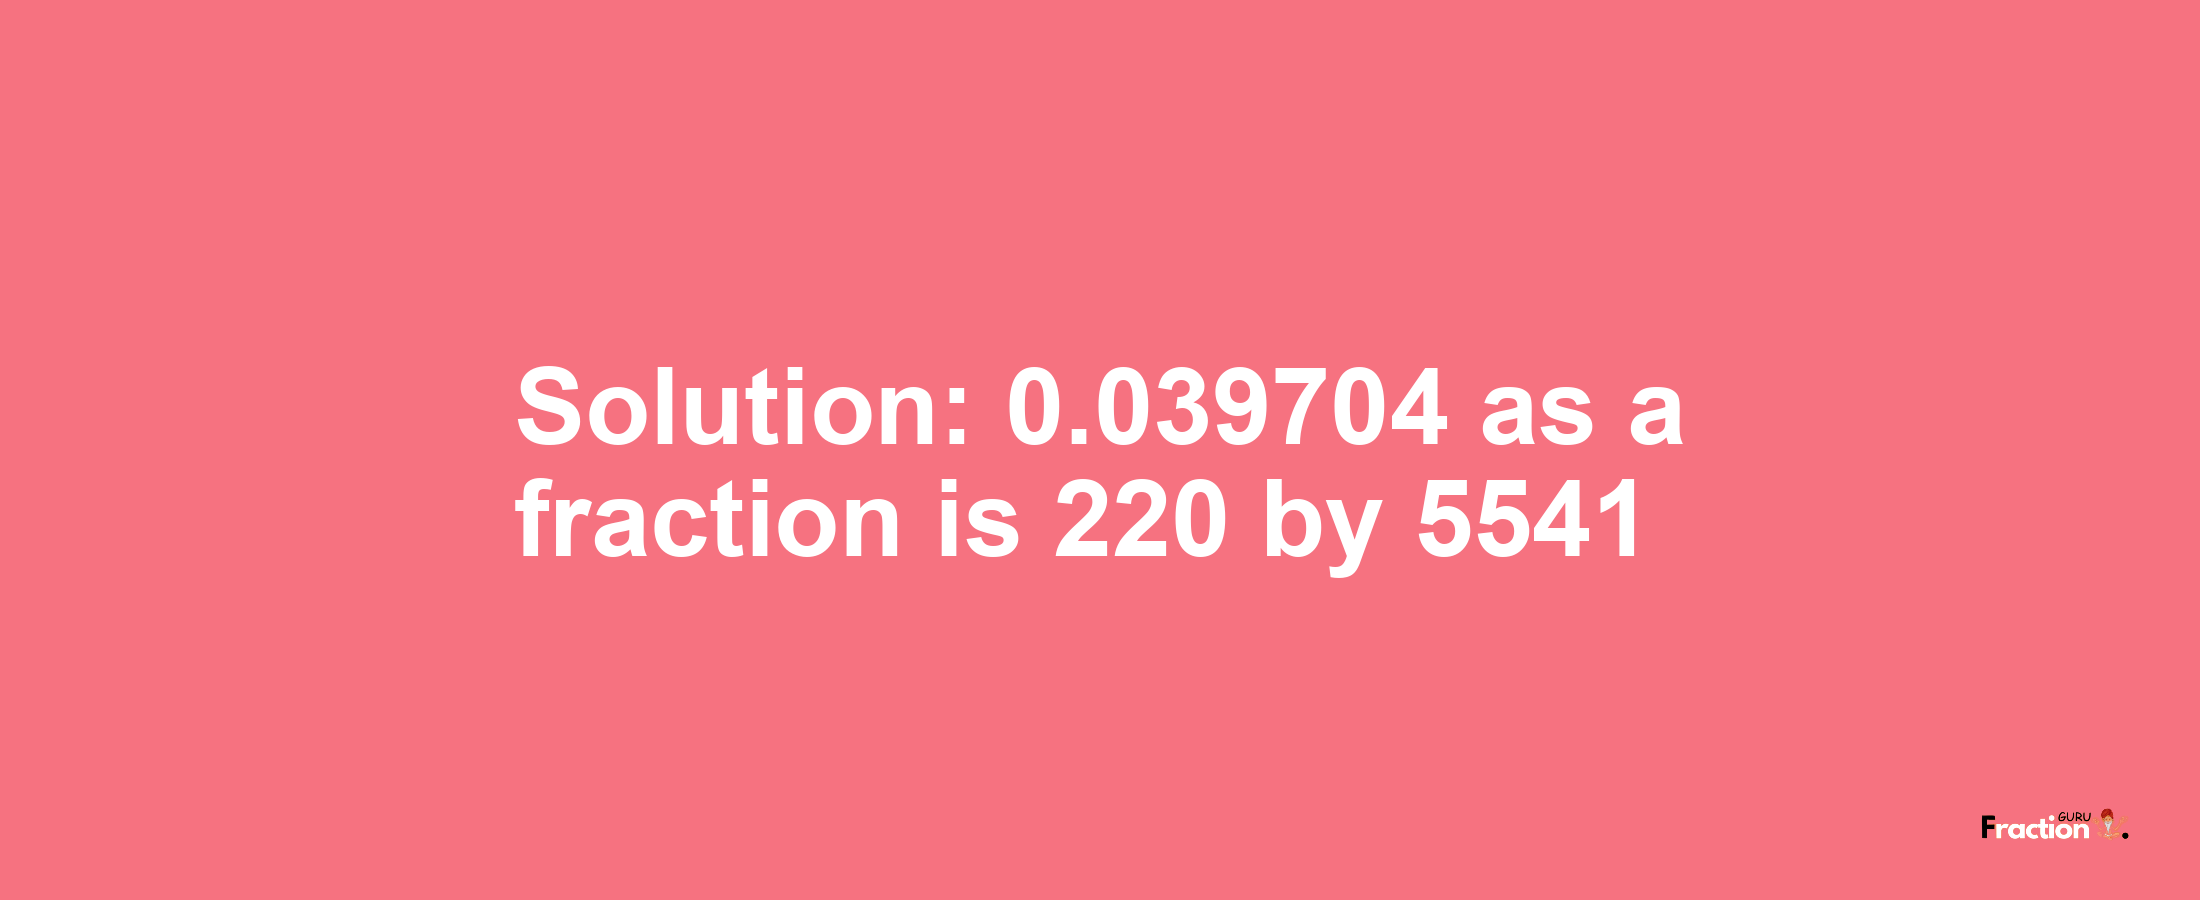 Solution:0.039704 as a fraction is 220/5541